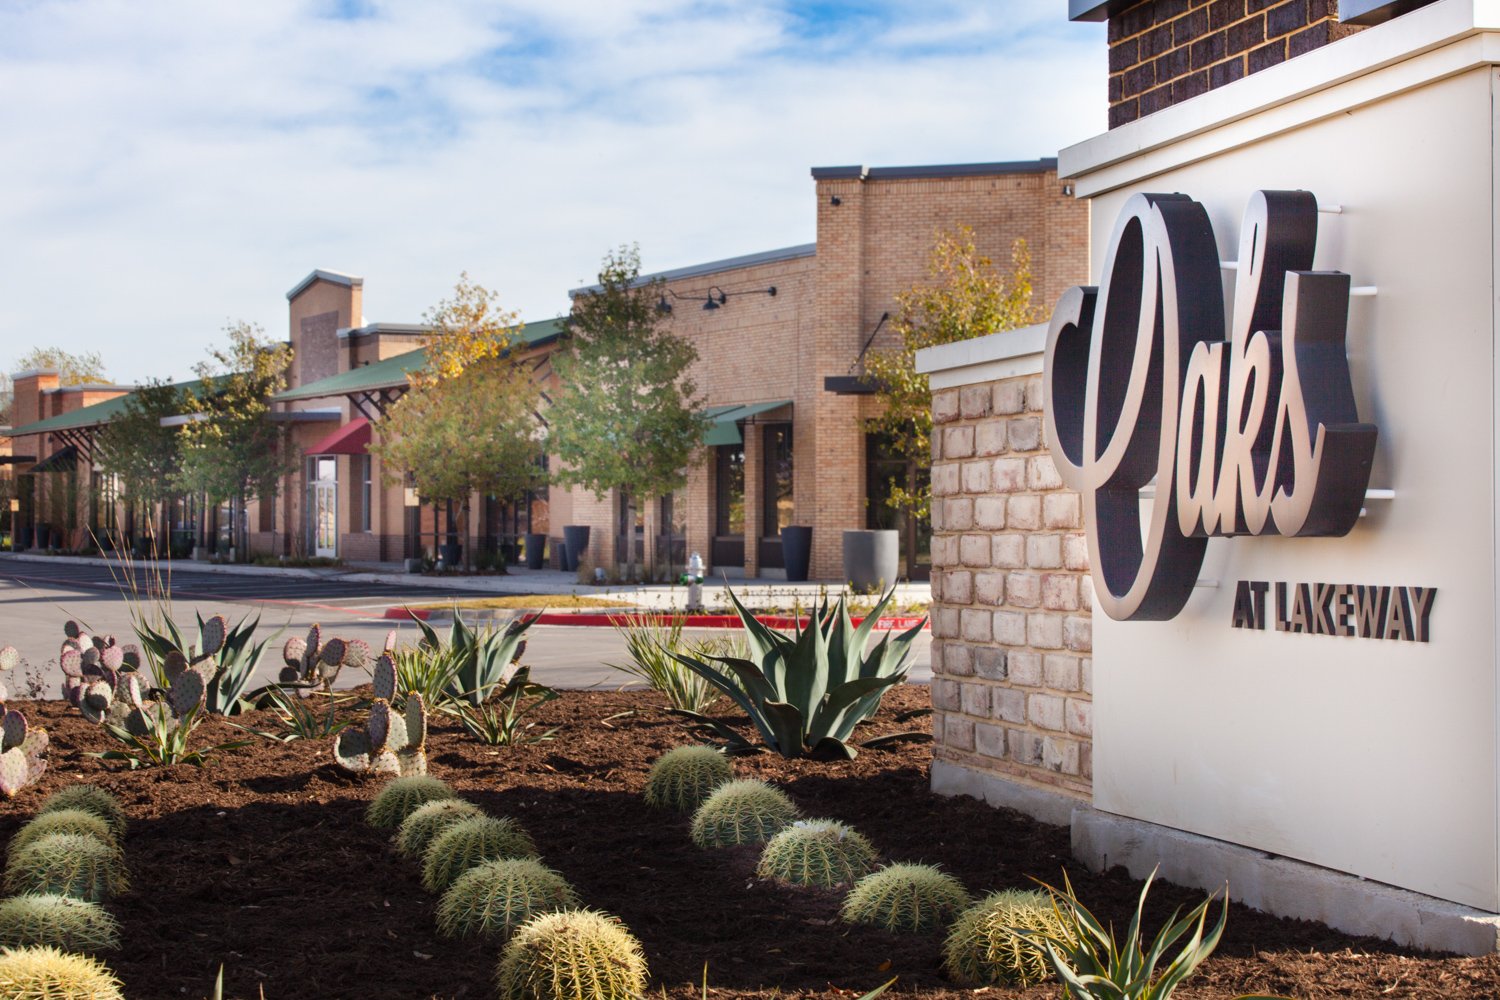 The Oaks at Lakeway - Lake Travis Outdoor Mall